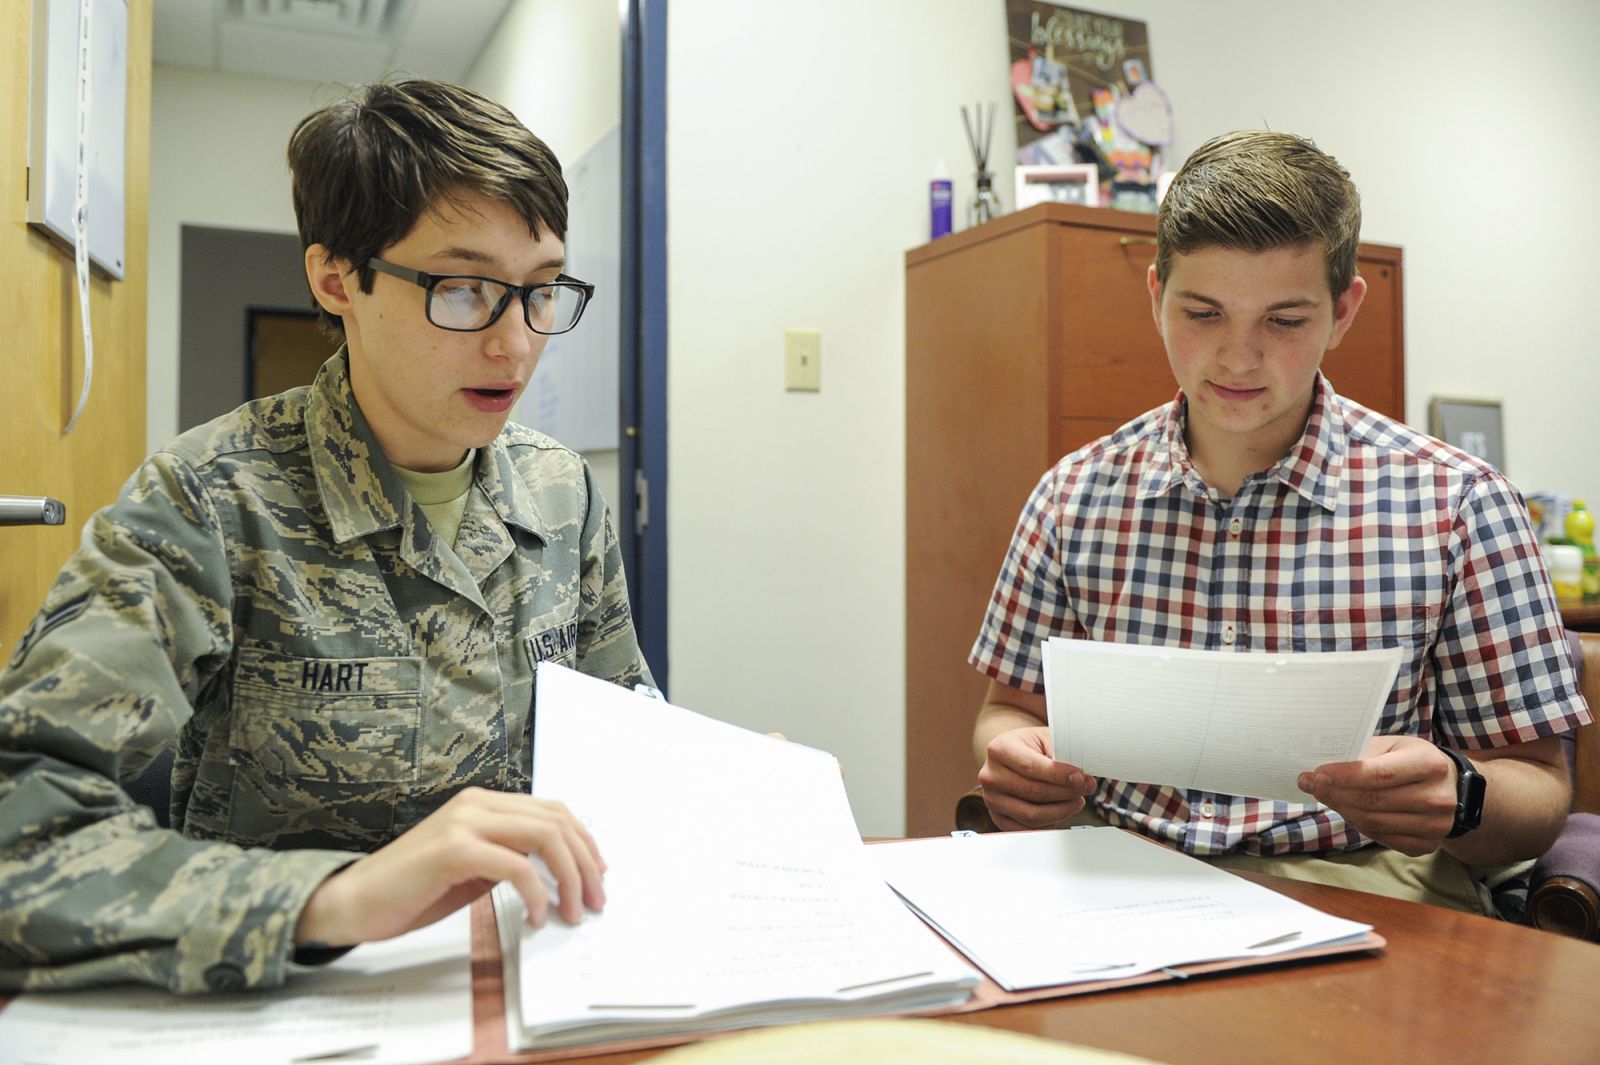 Airman 1st Class Jamie Hart, a contract specialist assigned to the 628th Contracting Squadron, goes over the procedures for reviewing a contract with Aleric Stell, a summer intern at Joint Base Charleston. (Photo/Senior Airman Thomas T. Charlton for the Air Force)